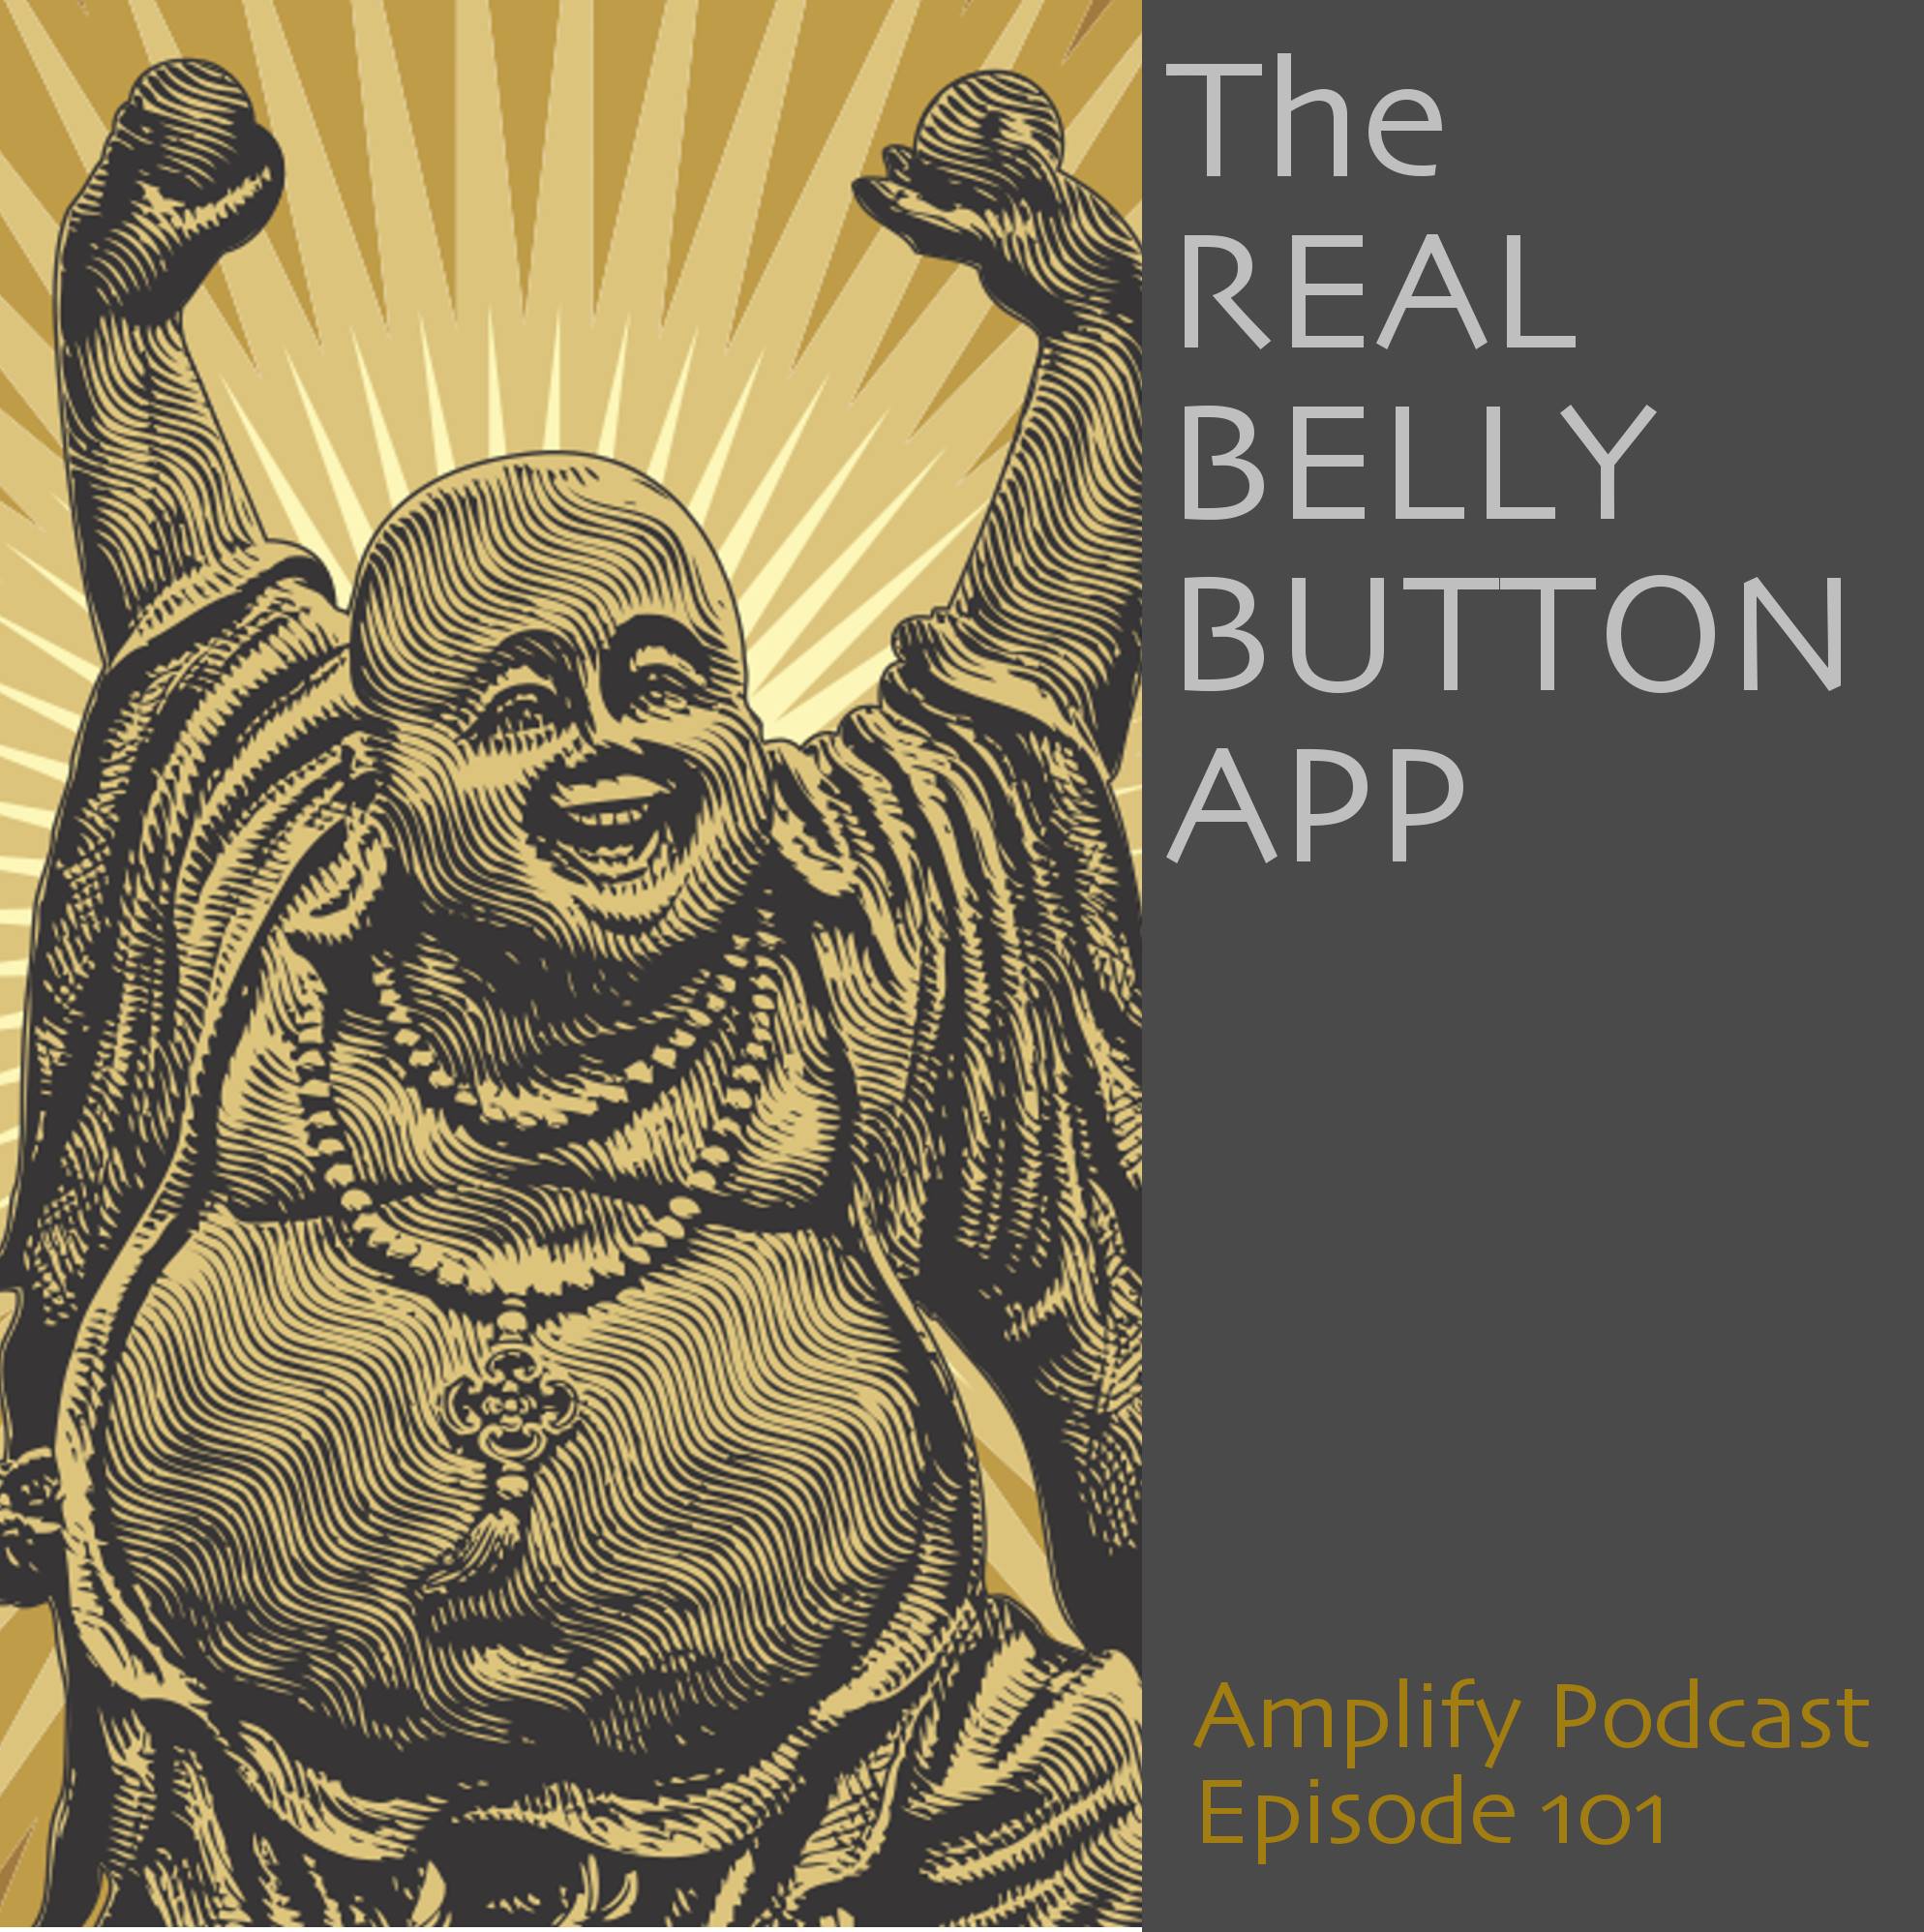 You are currently viewing The Real Belly Button App